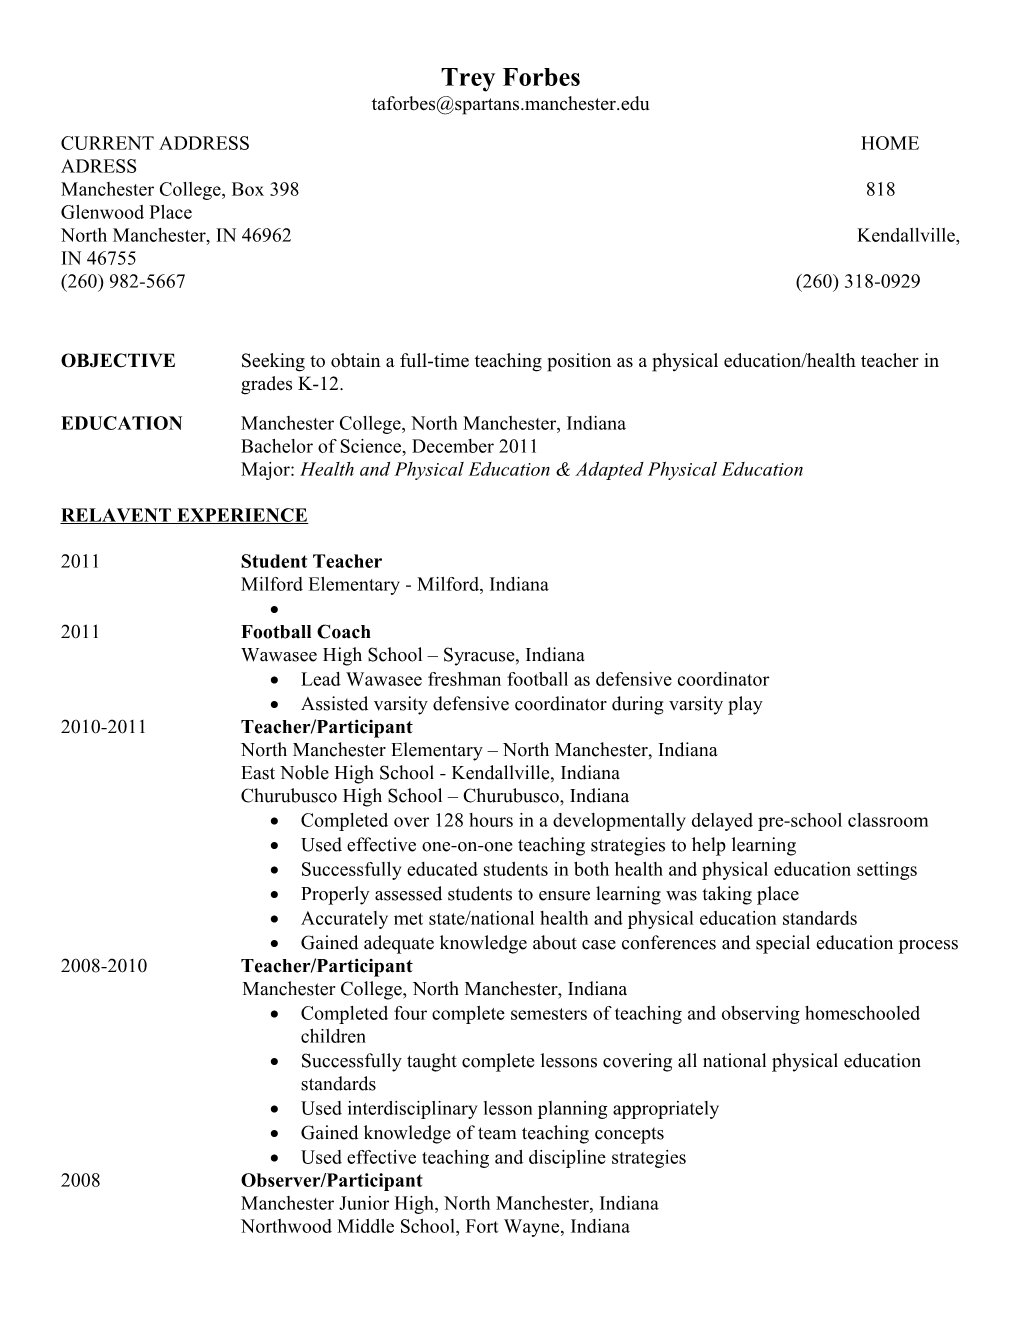 Objectiveseeking to Obtain a Full-Time Teaching Position As a Physical Education/Health